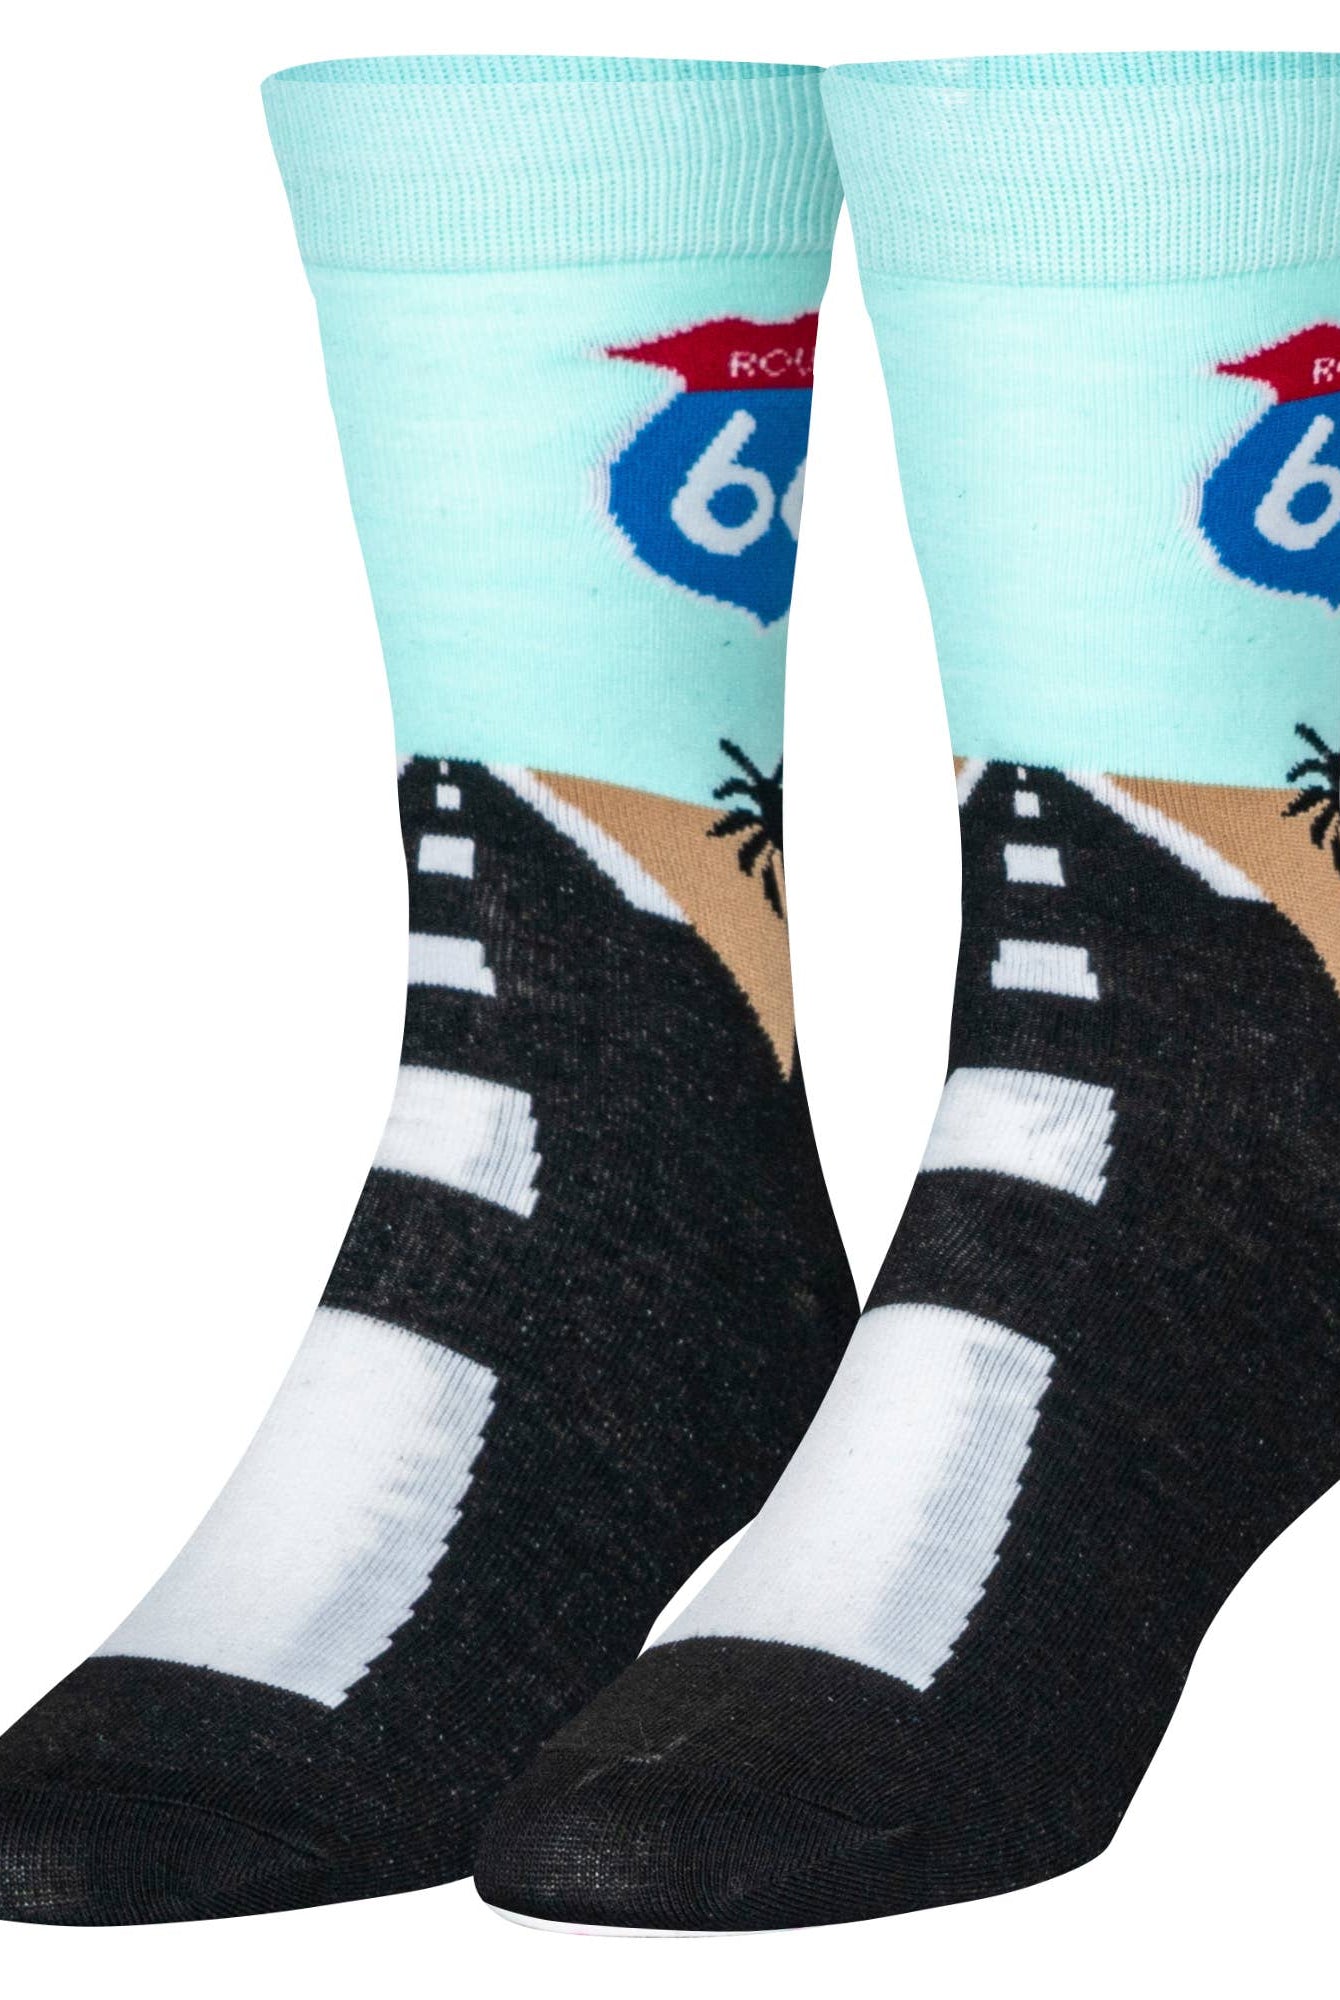 Route 66 - Mens Crew Folded | Stuffology Boutique-Socks-Crazy Socks-Stuffology - Where Vintage Meets Modern, A Boutique for Real Women in Crosbyton, TX